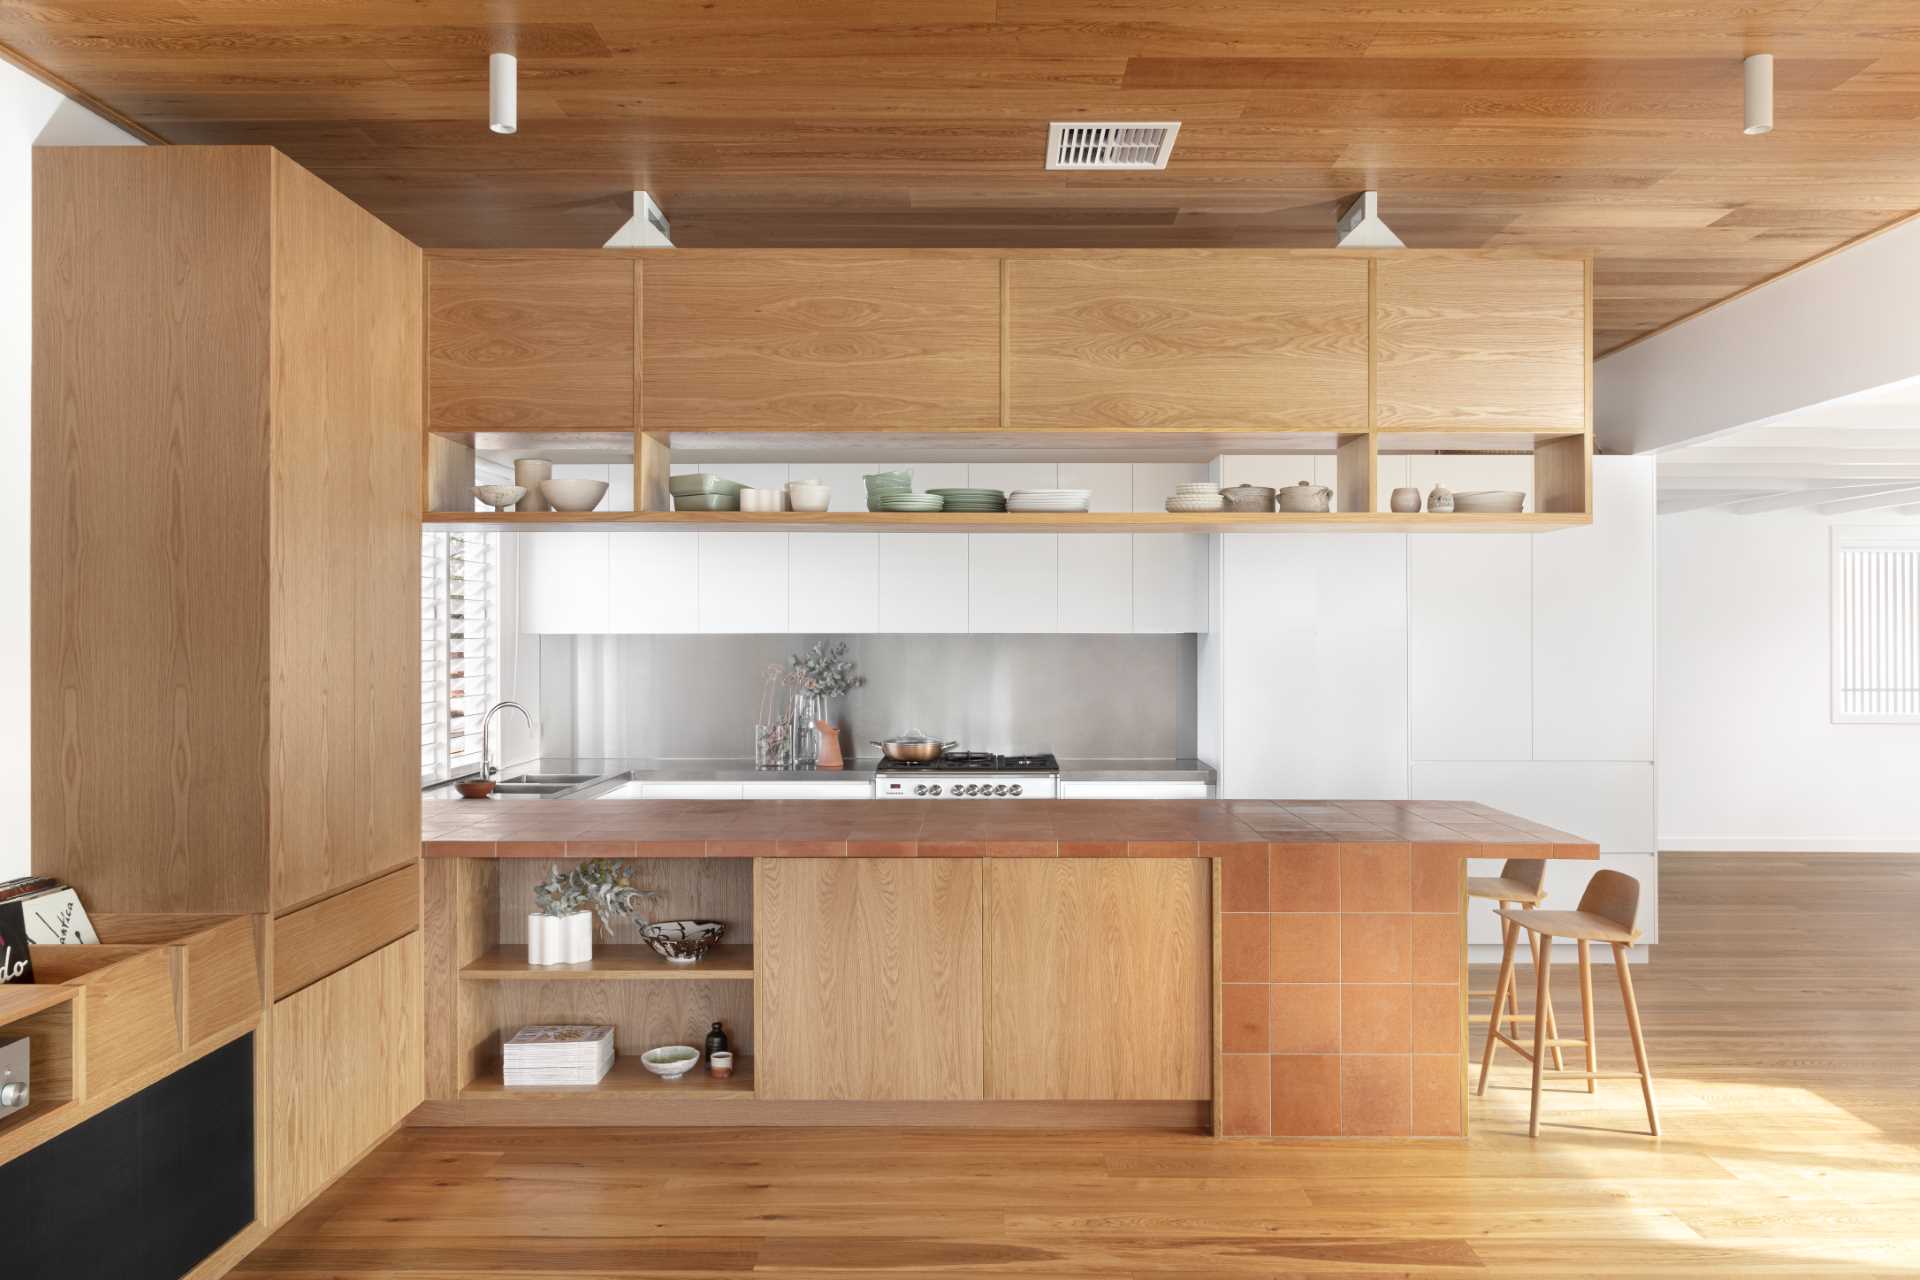 This kitchen design includes a peninsula that's clad in terracotta tiles.